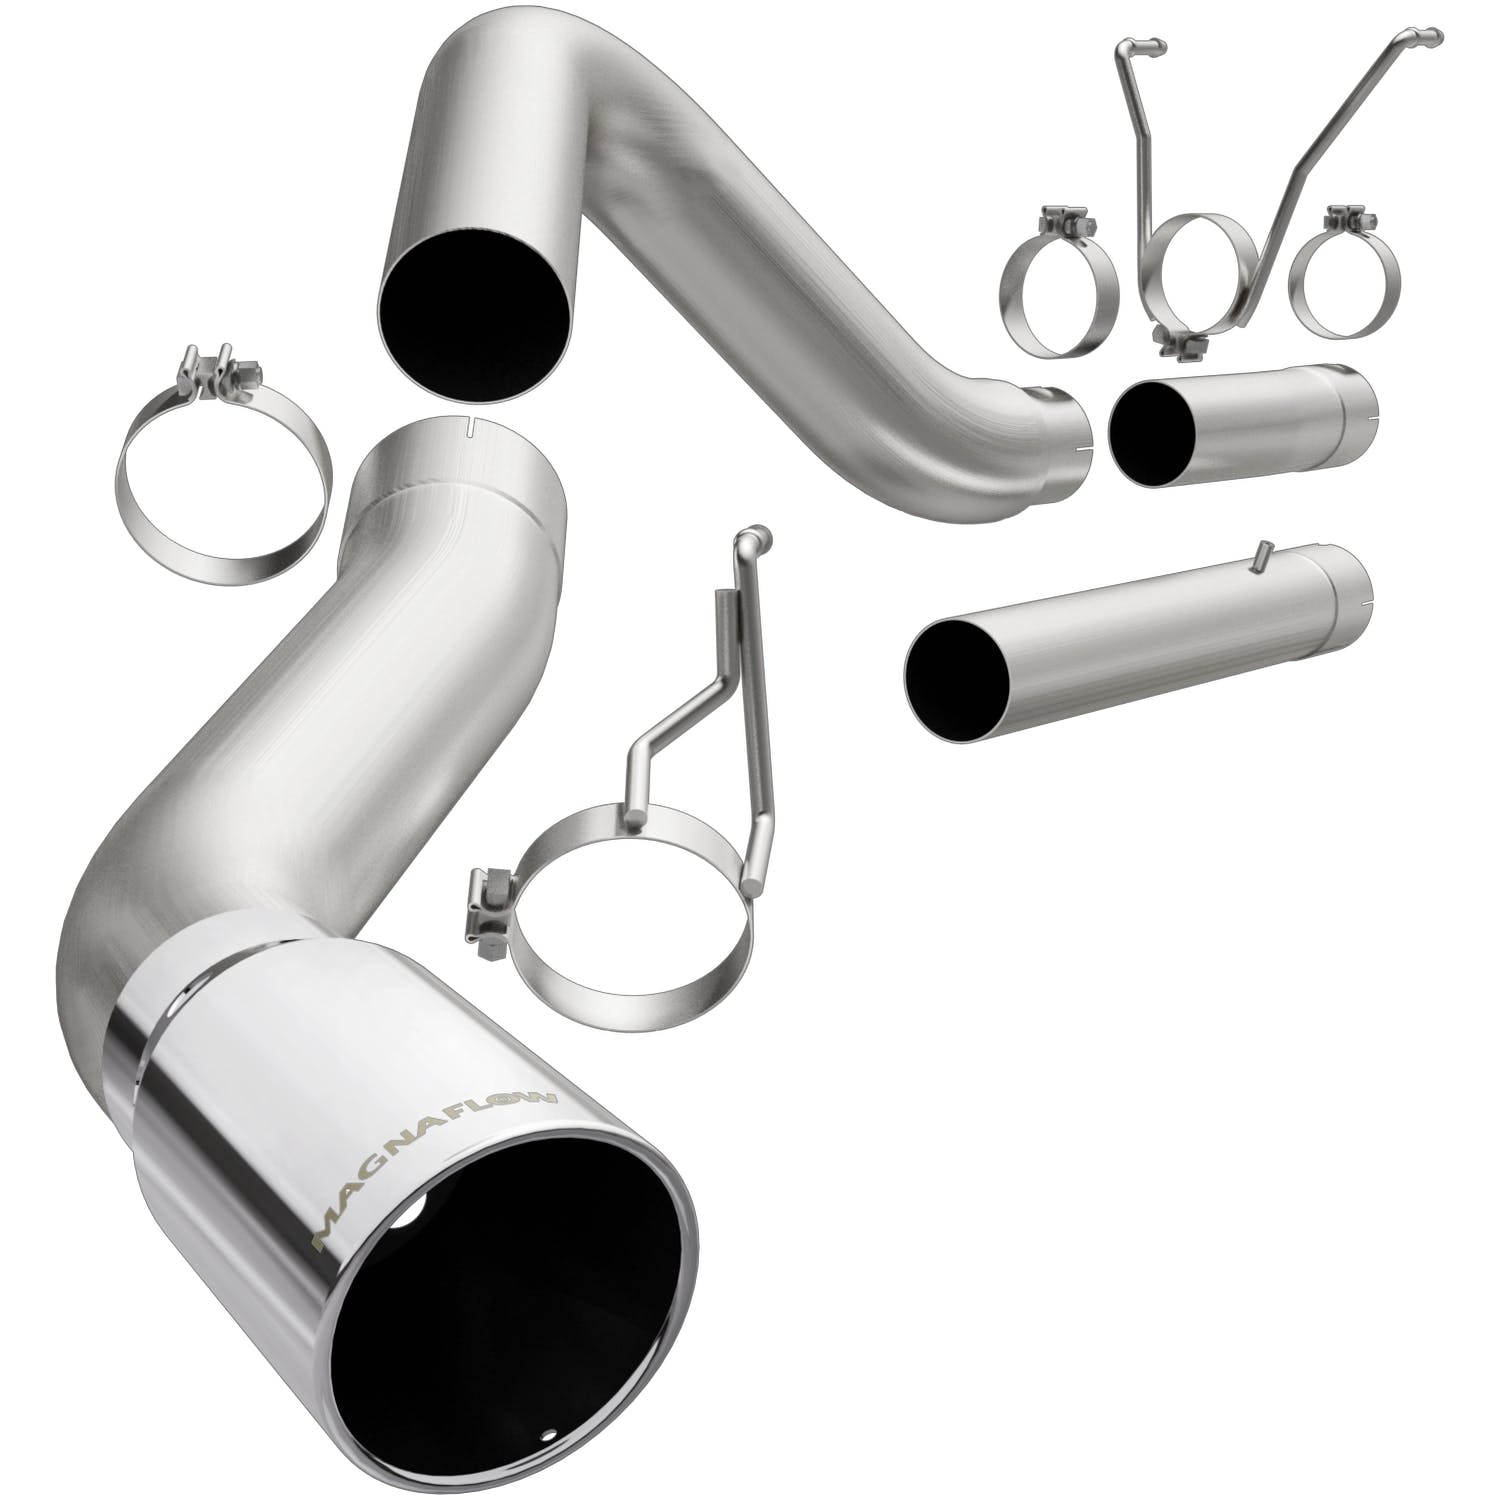 MagnaFlow Exhaust Products 18954 Cat Back-Diesel Aluminized